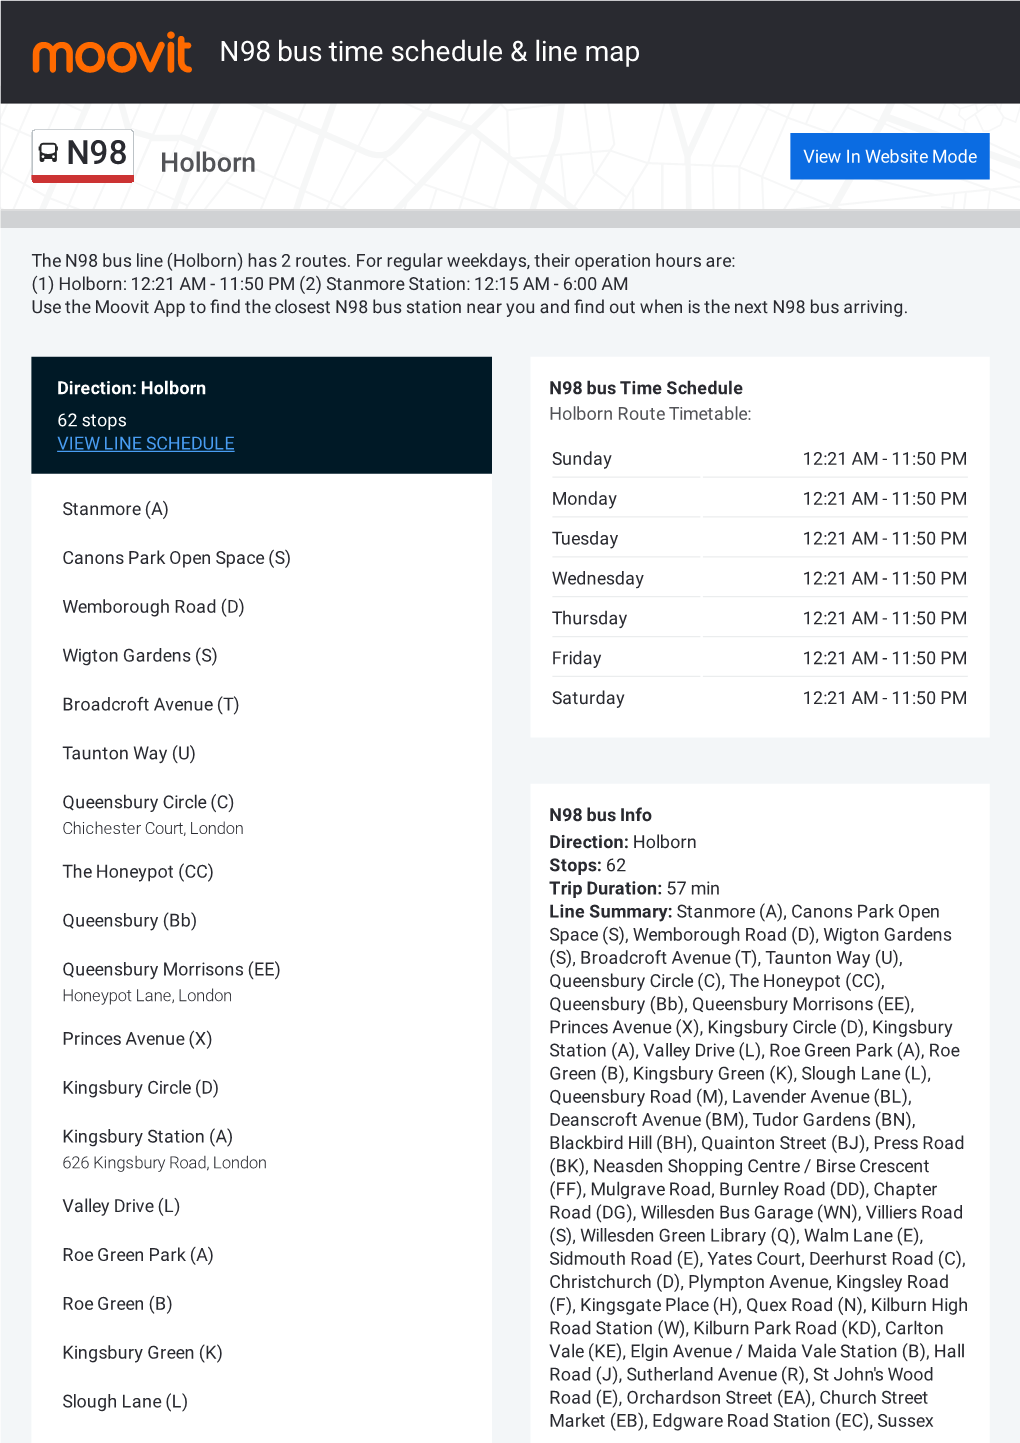 N98 Bus Time Schedule & Line Route